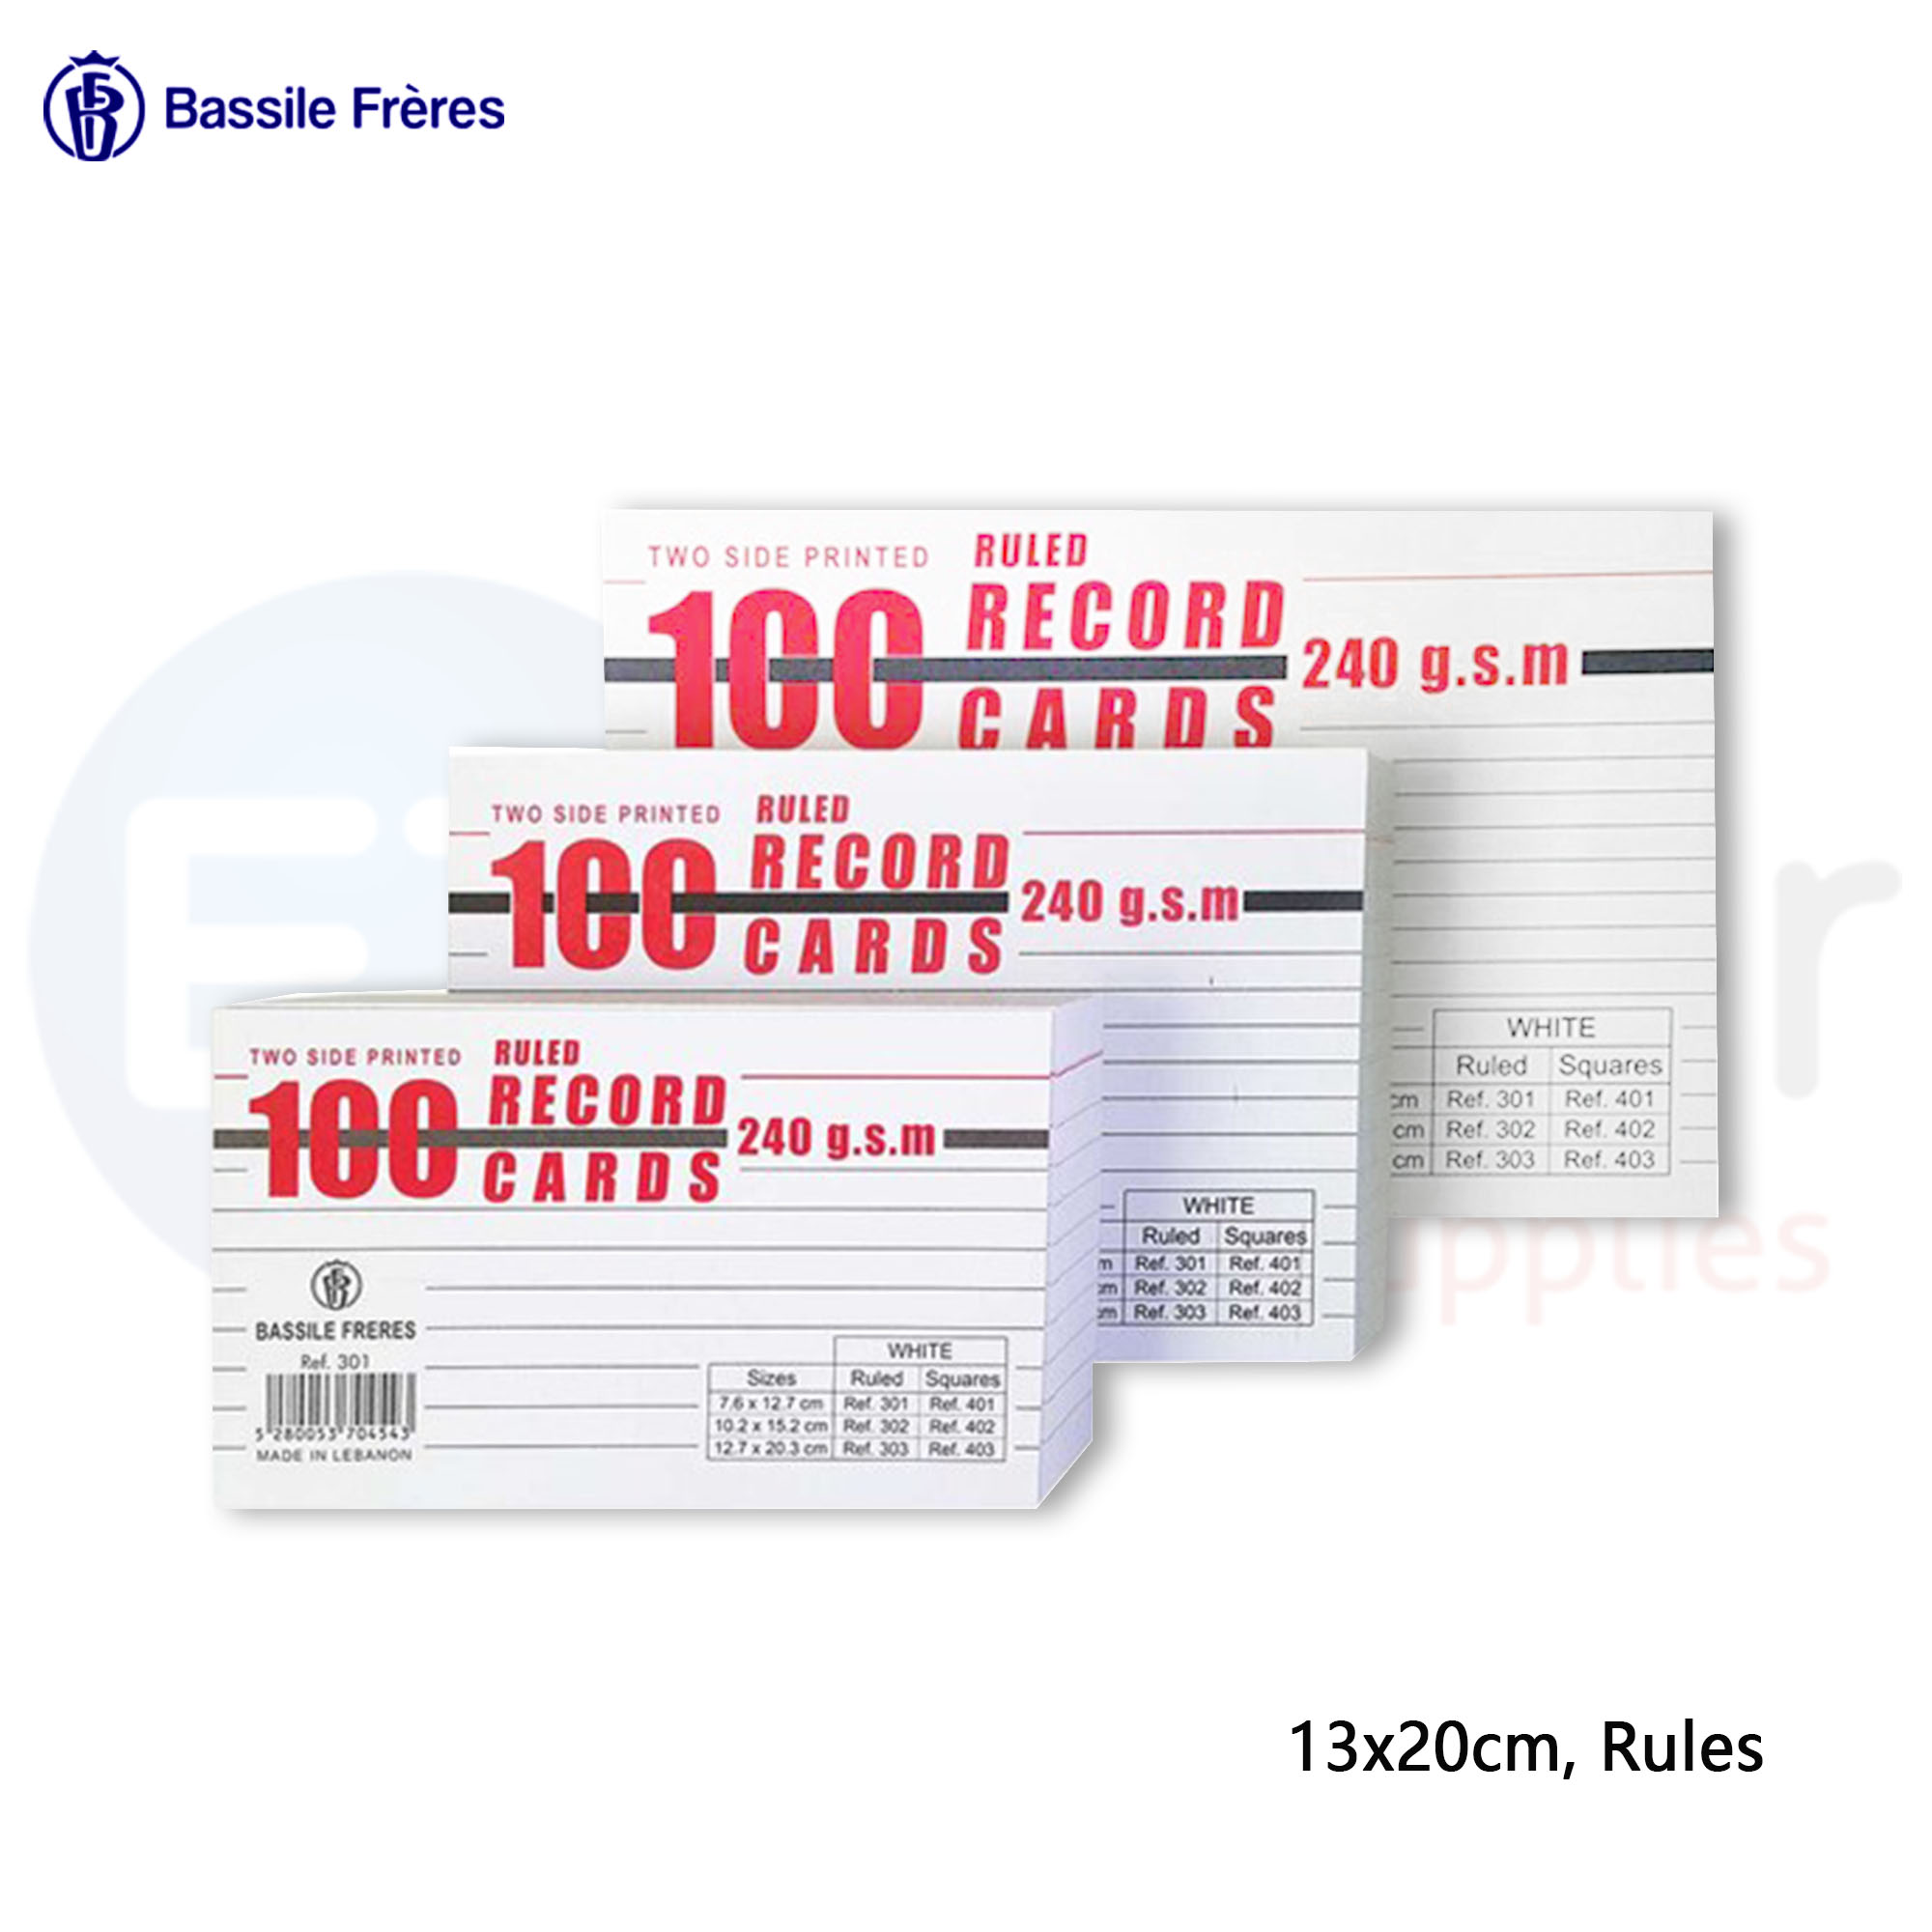 +Index cards, white, 13x20 (100 per set) ruled